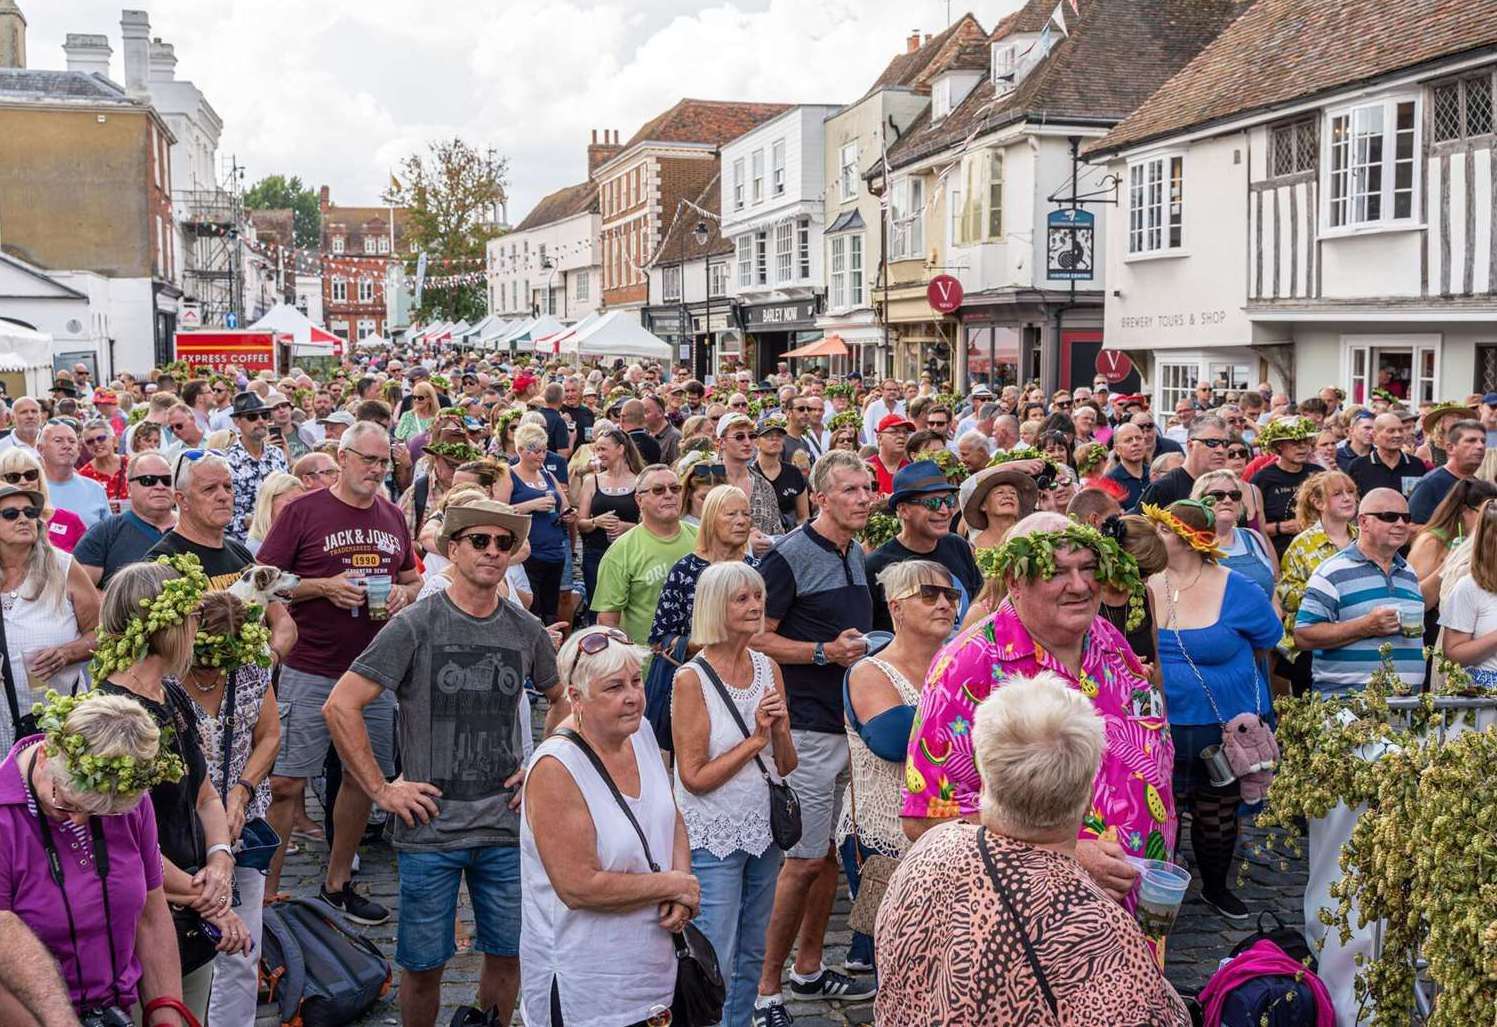 Faversham is always packed with visitors for the Hop Festival